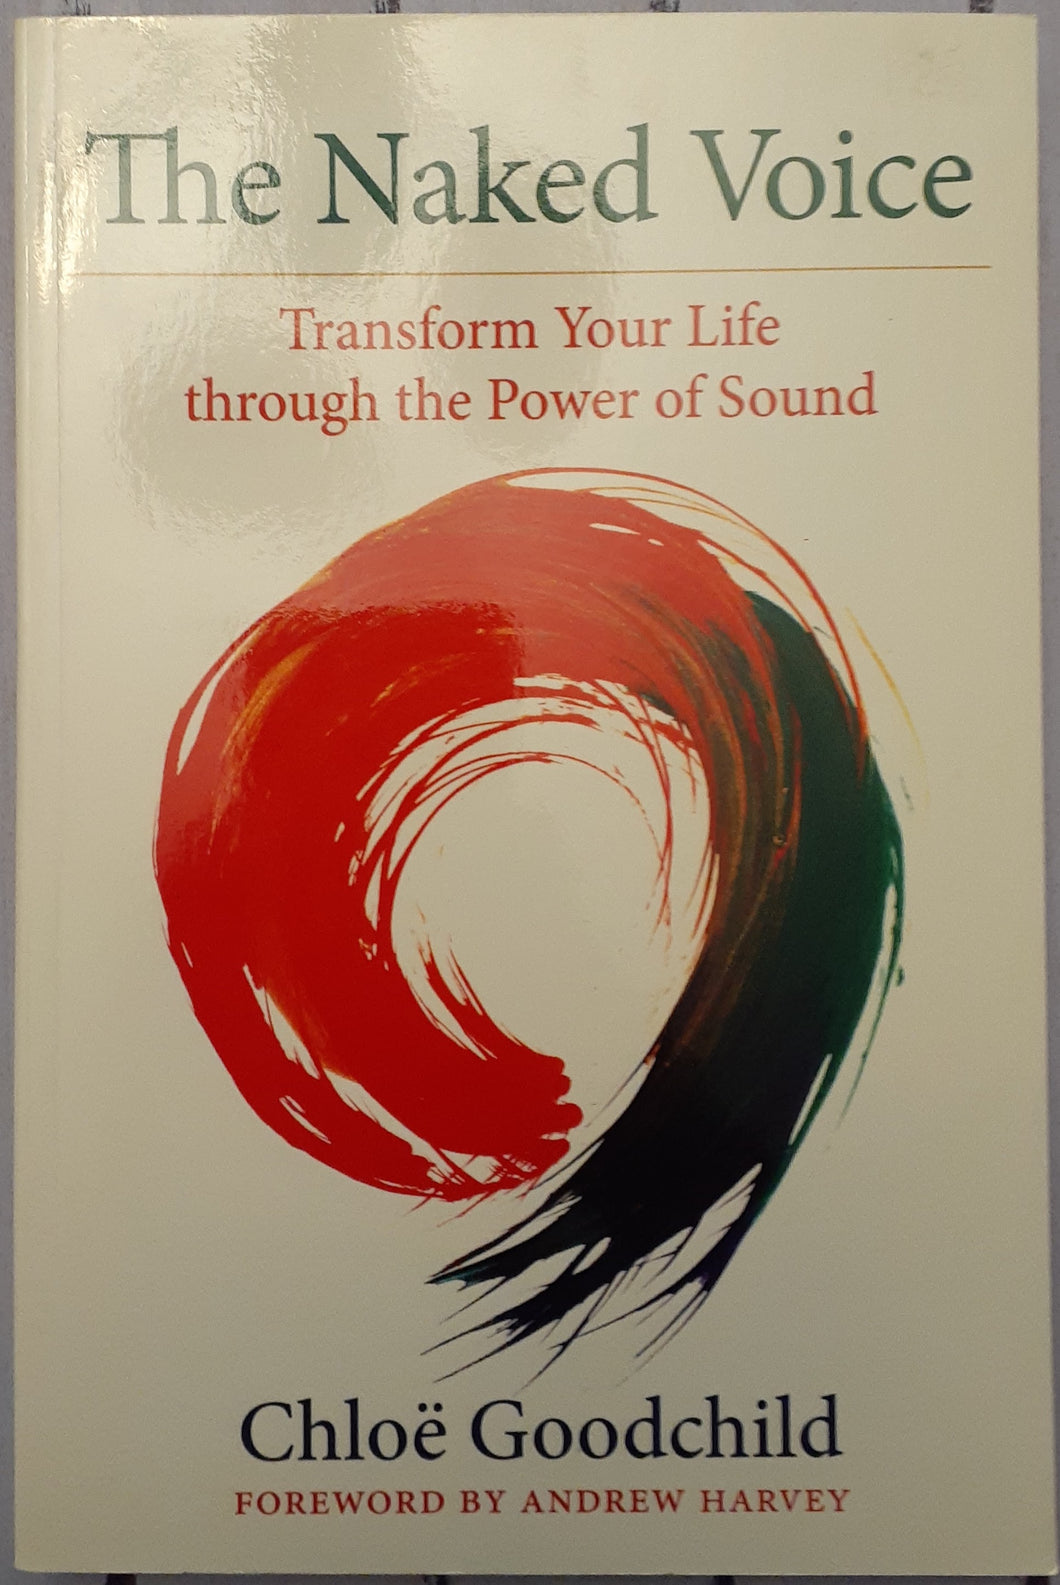 The Naked Voice: Transform Your Life Through the Power of Sound